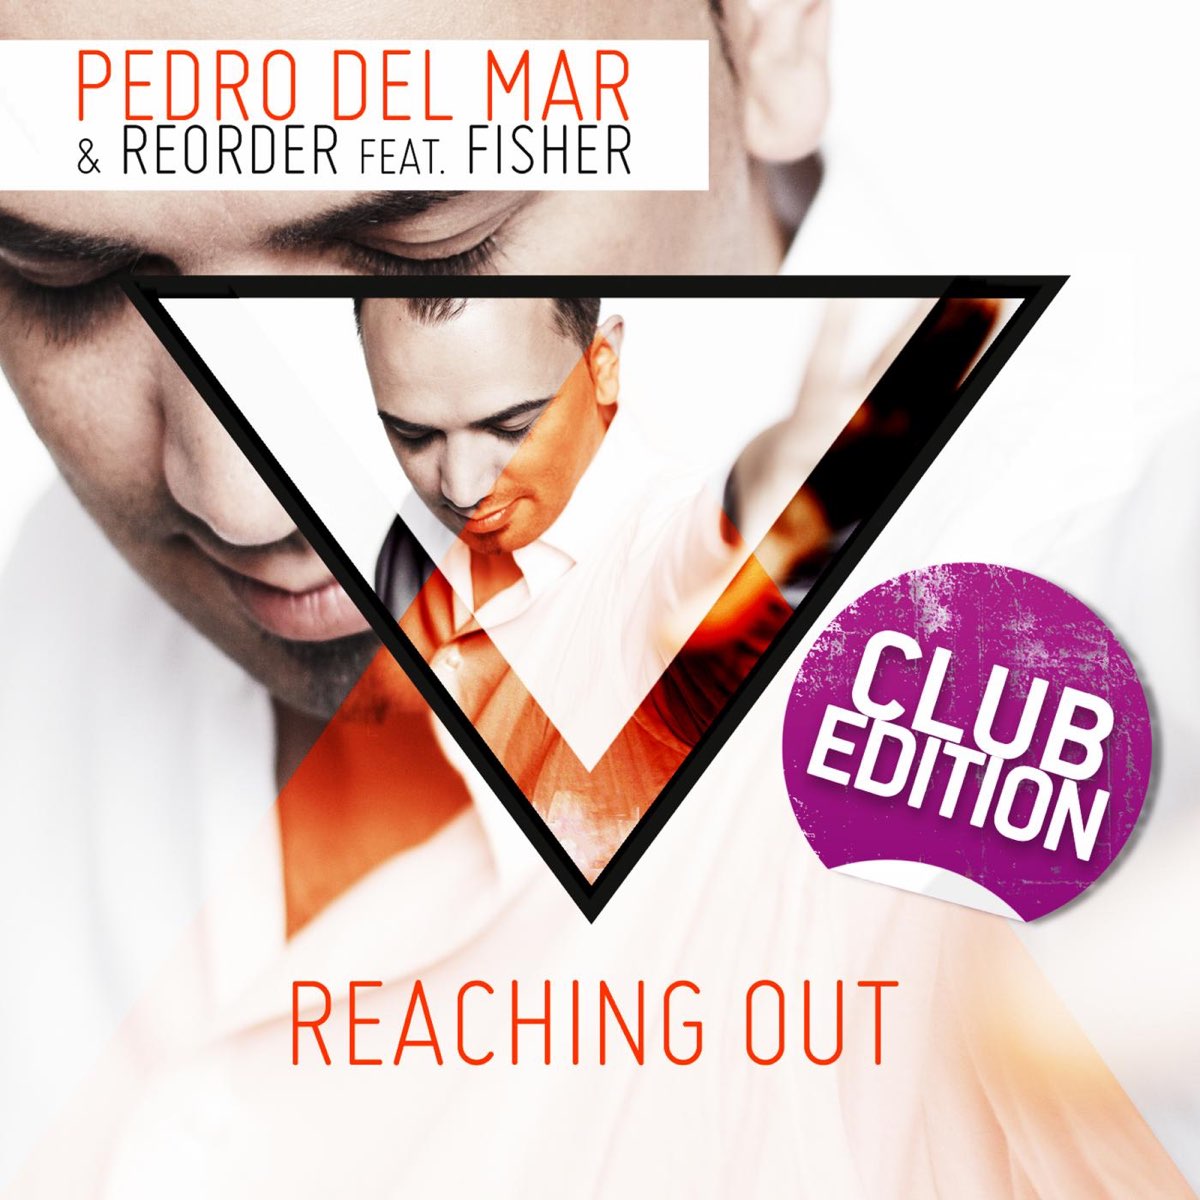 Включи песню pedro. Pedro del Mar with reorder feat. Fisher - reaching out (Eximinds Remix). Del Mar песня. Песня del Mar текст. Paul Messina - reaching out (Radio Edit).